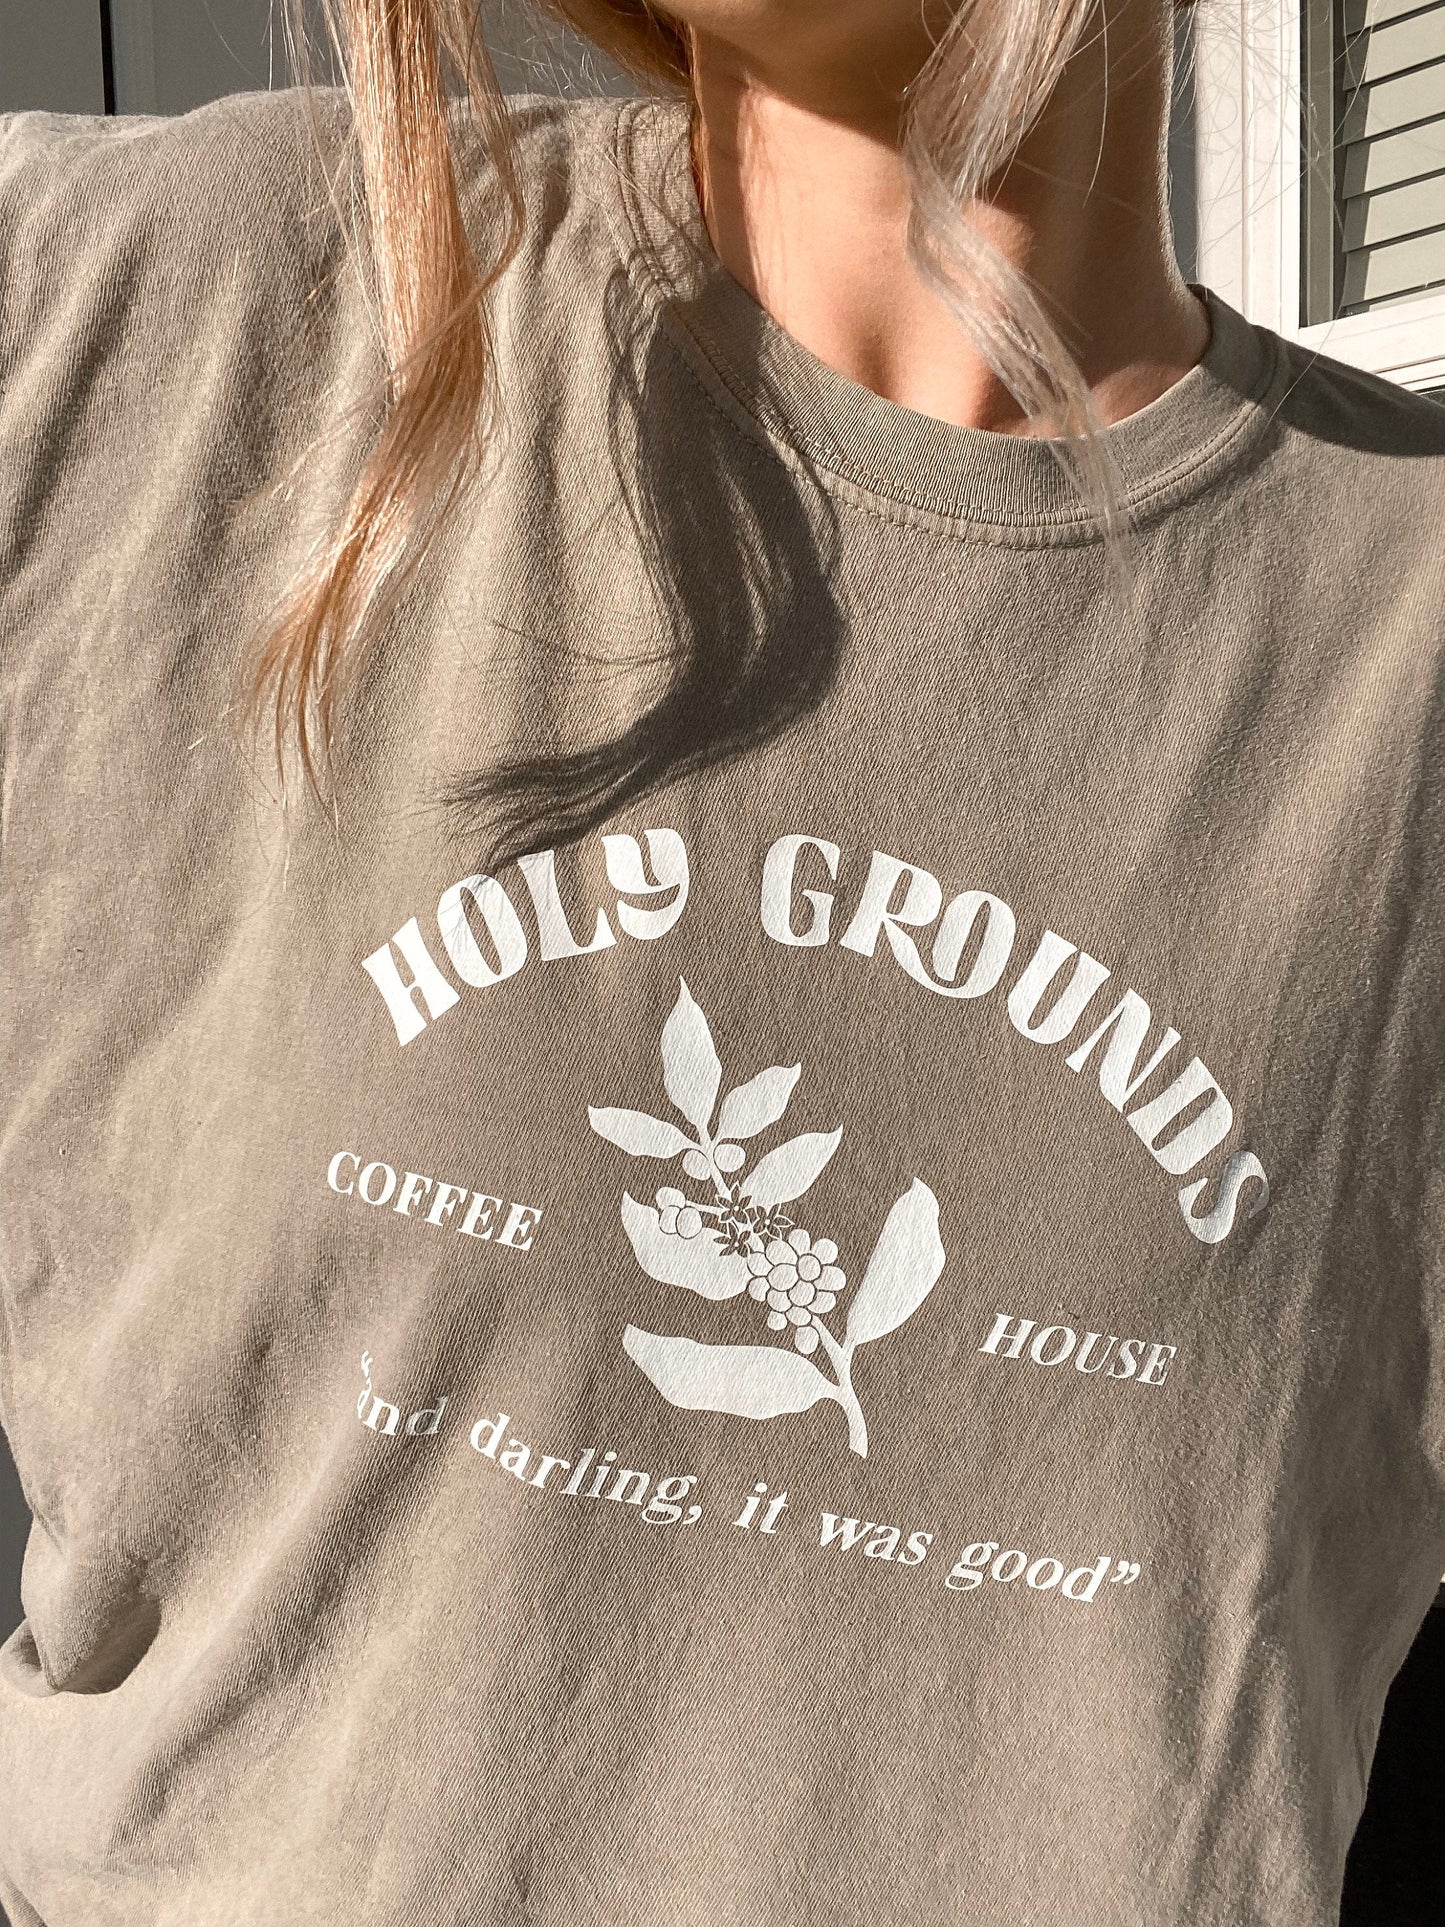 Holy Ground Comfort Colors Tee // TSwift Red Shirt // Holy Grounds Coffee Shop Tee // Gifts for Swifties // Taylor's Version Shirt